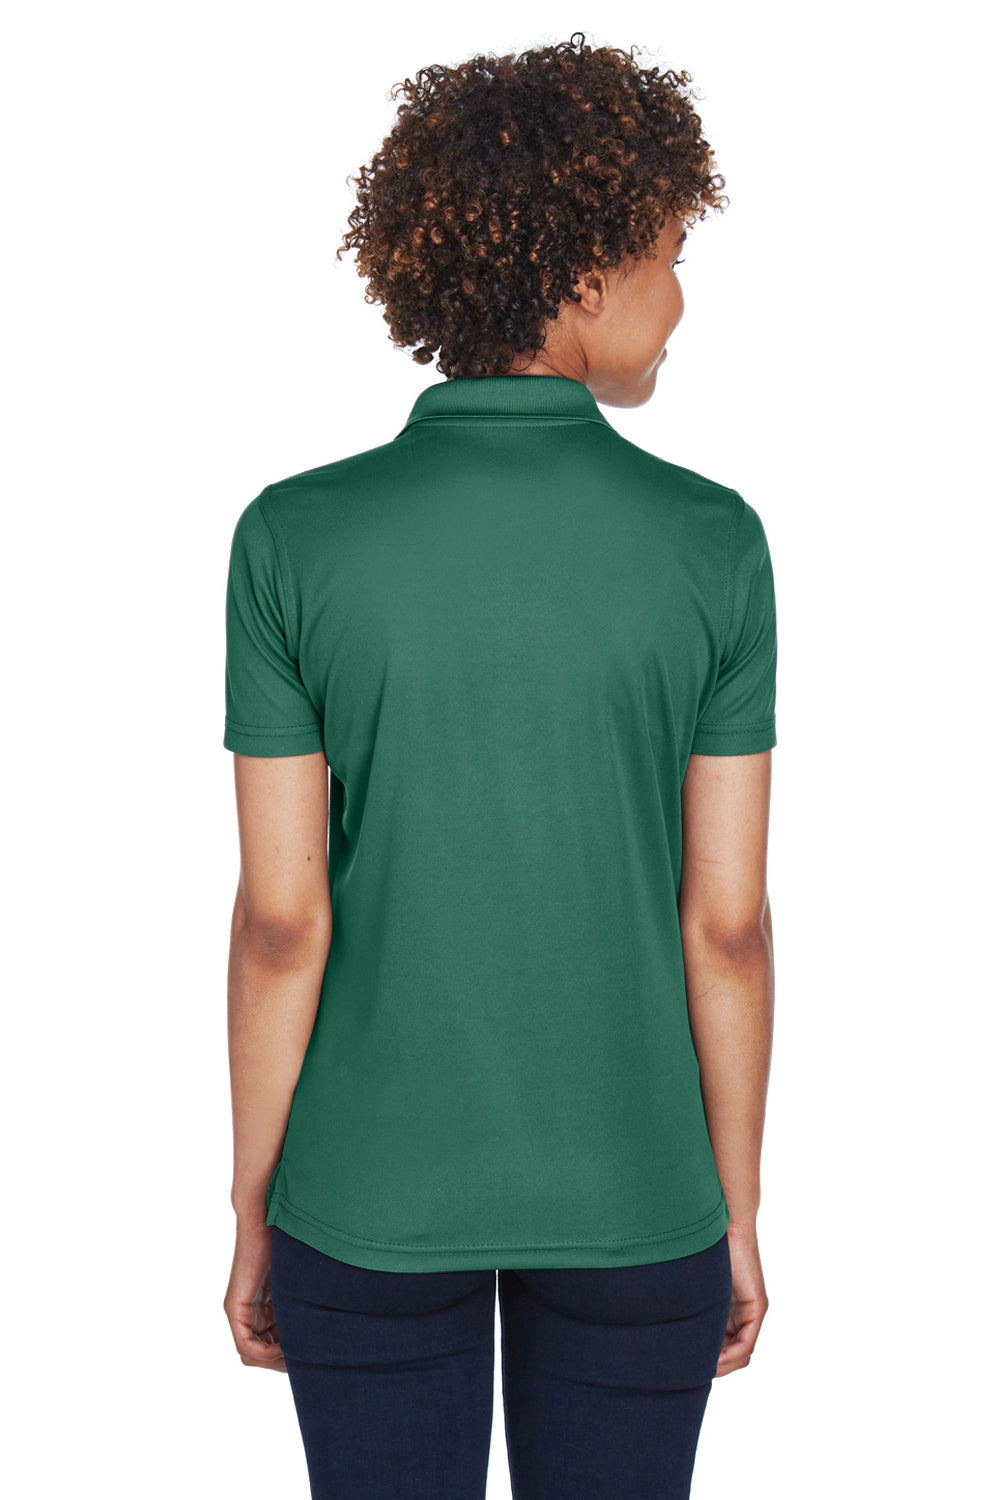 UltraClub 8210L Womens Cool & Dry Moisture Wicking Short Sleeve Polo Shirt Forest Green Back